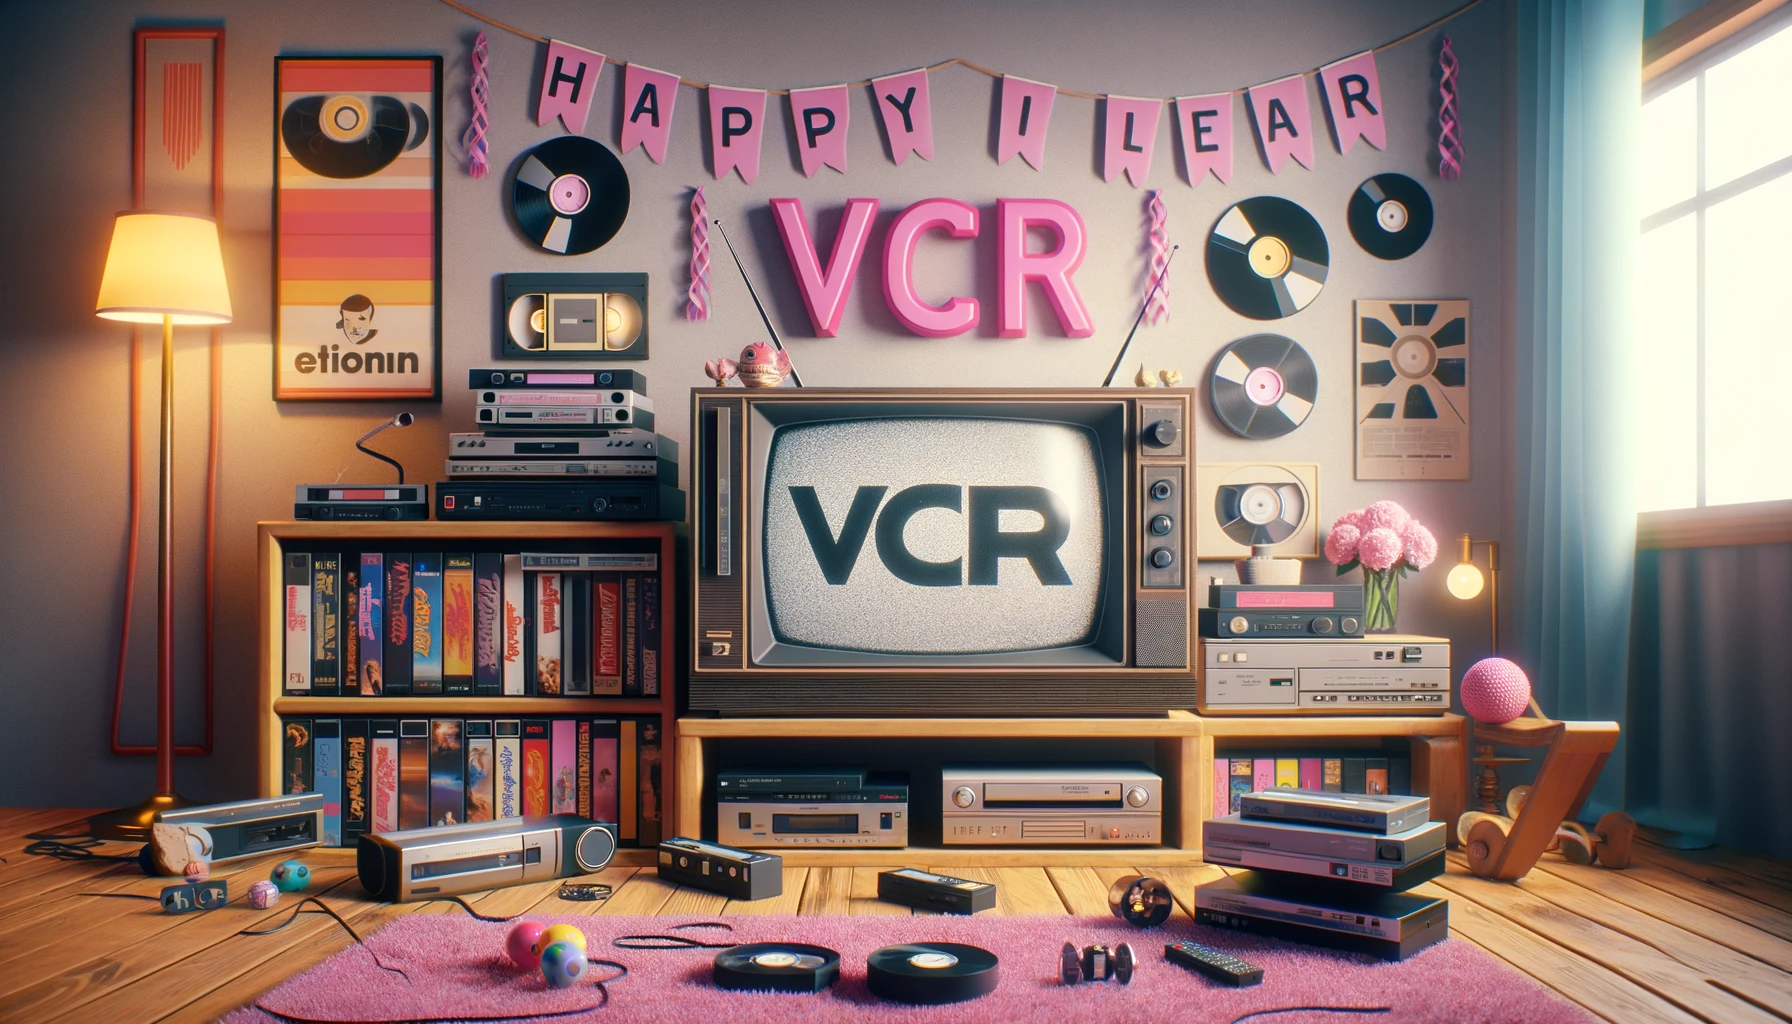 Rewind and Enjoy: Sweet VCR Day Greetings